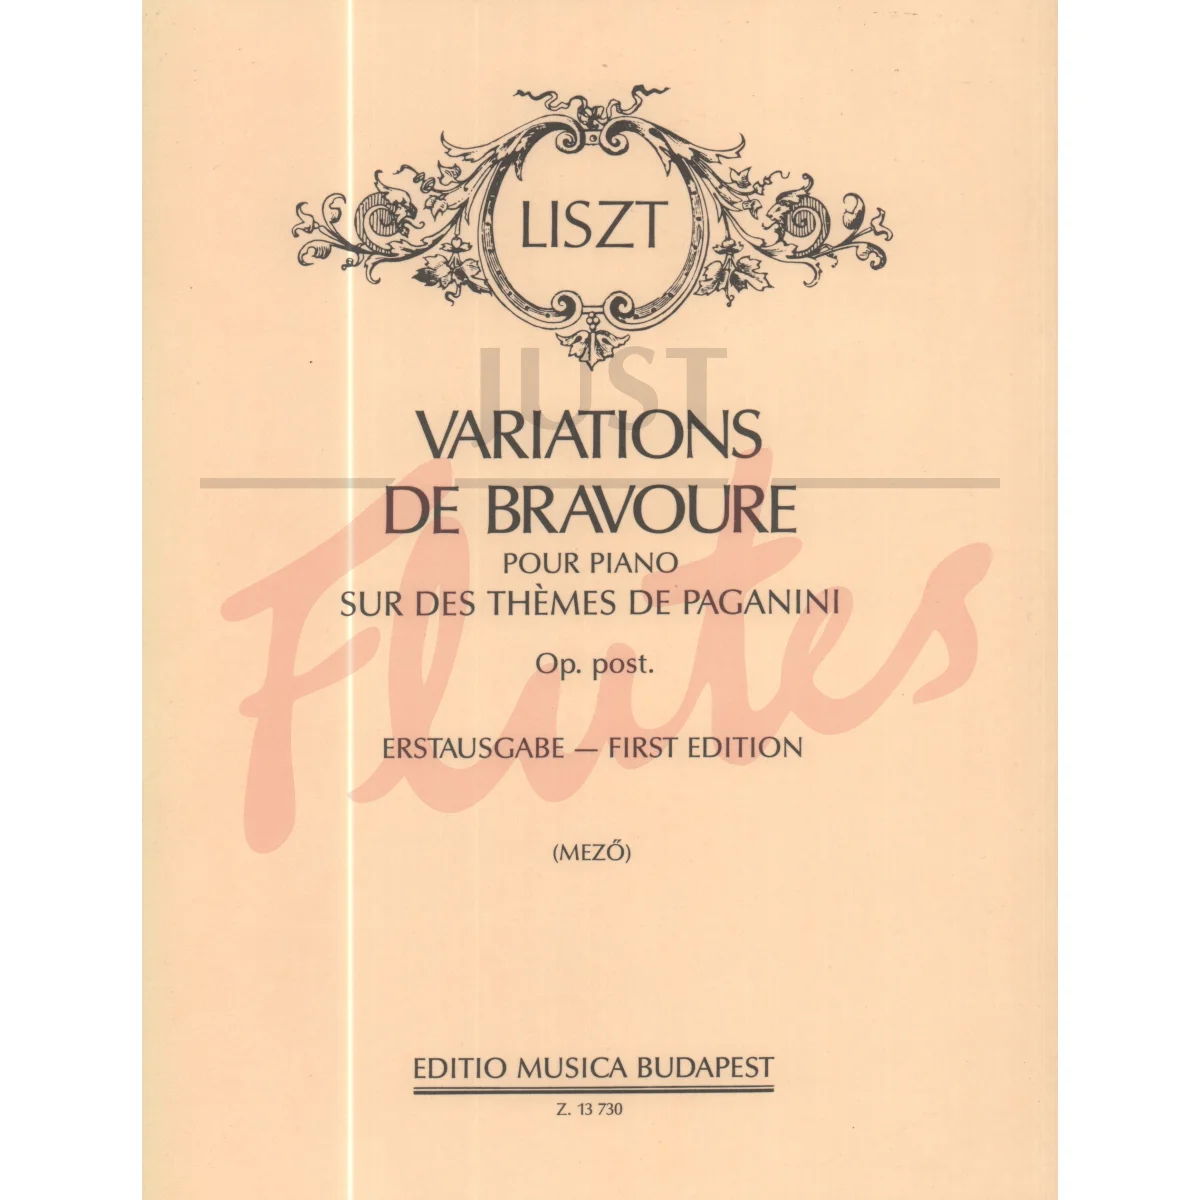 Variations de Bravoure on Themes of Paganini for Piano